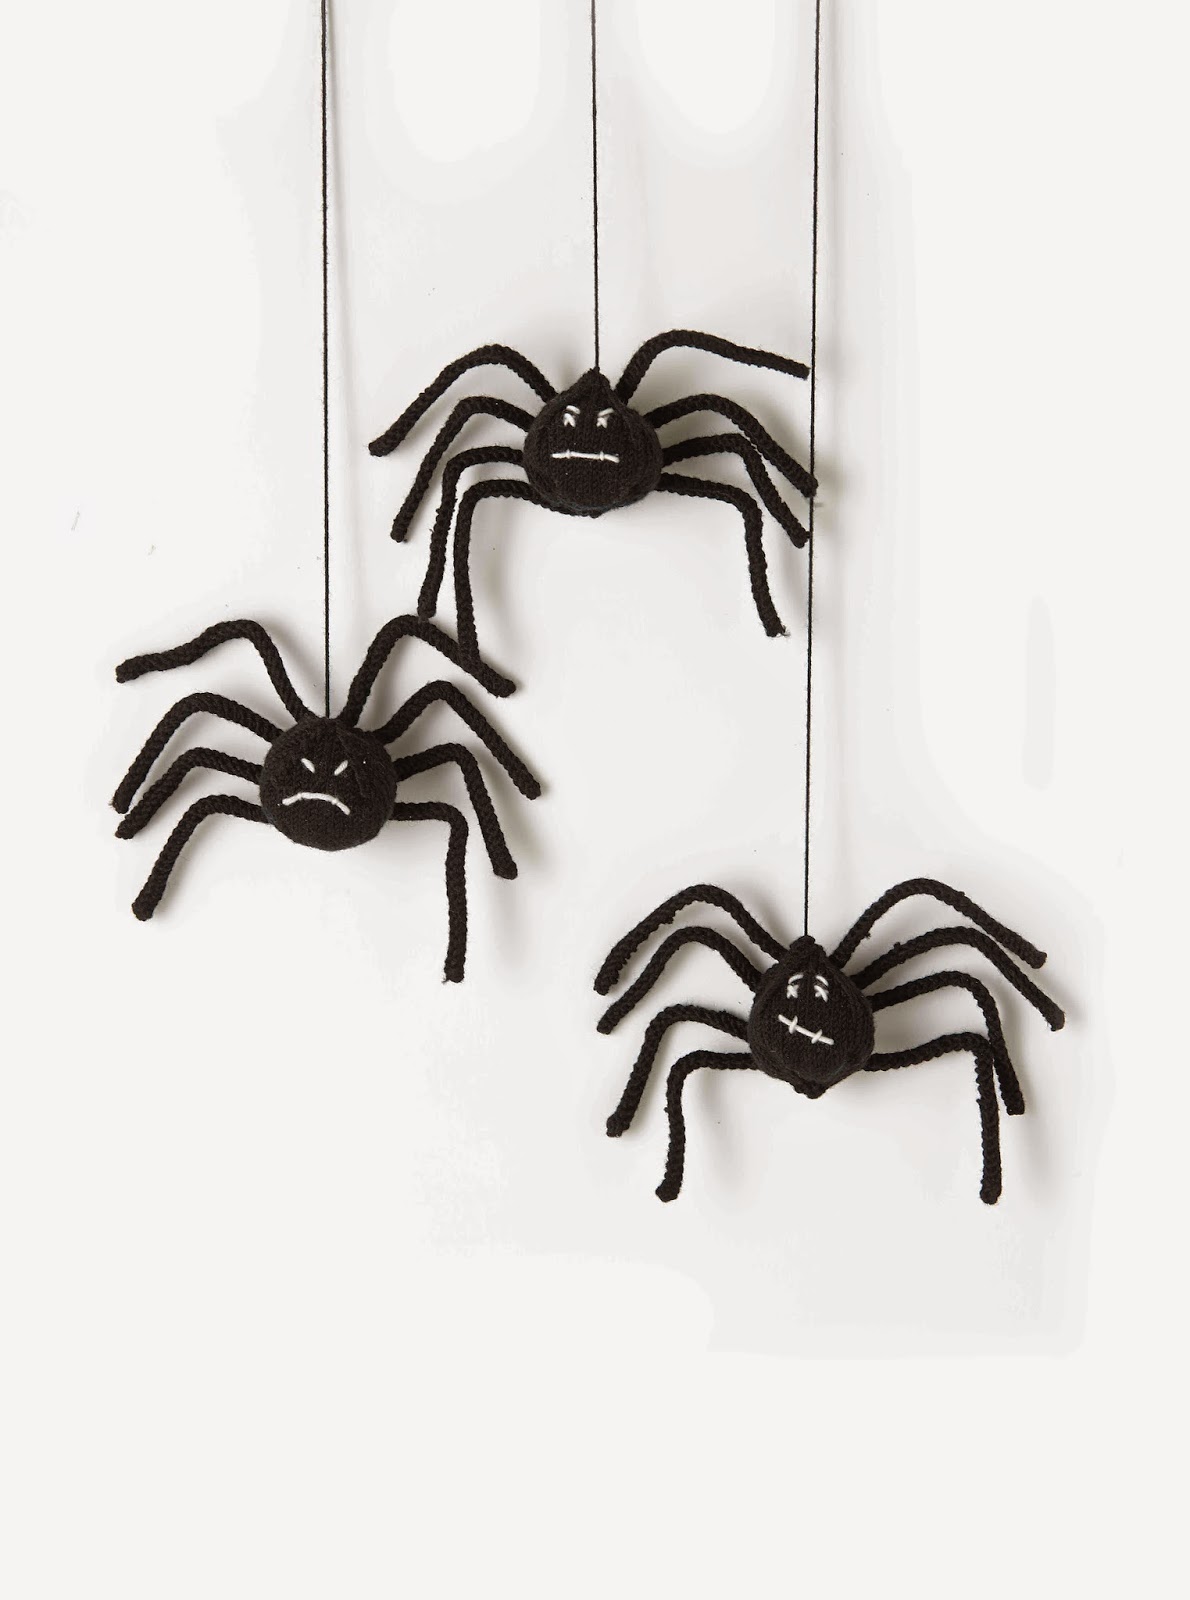 http://millamia.com/pat_size.php?name=Spider Toy&sort=&type=